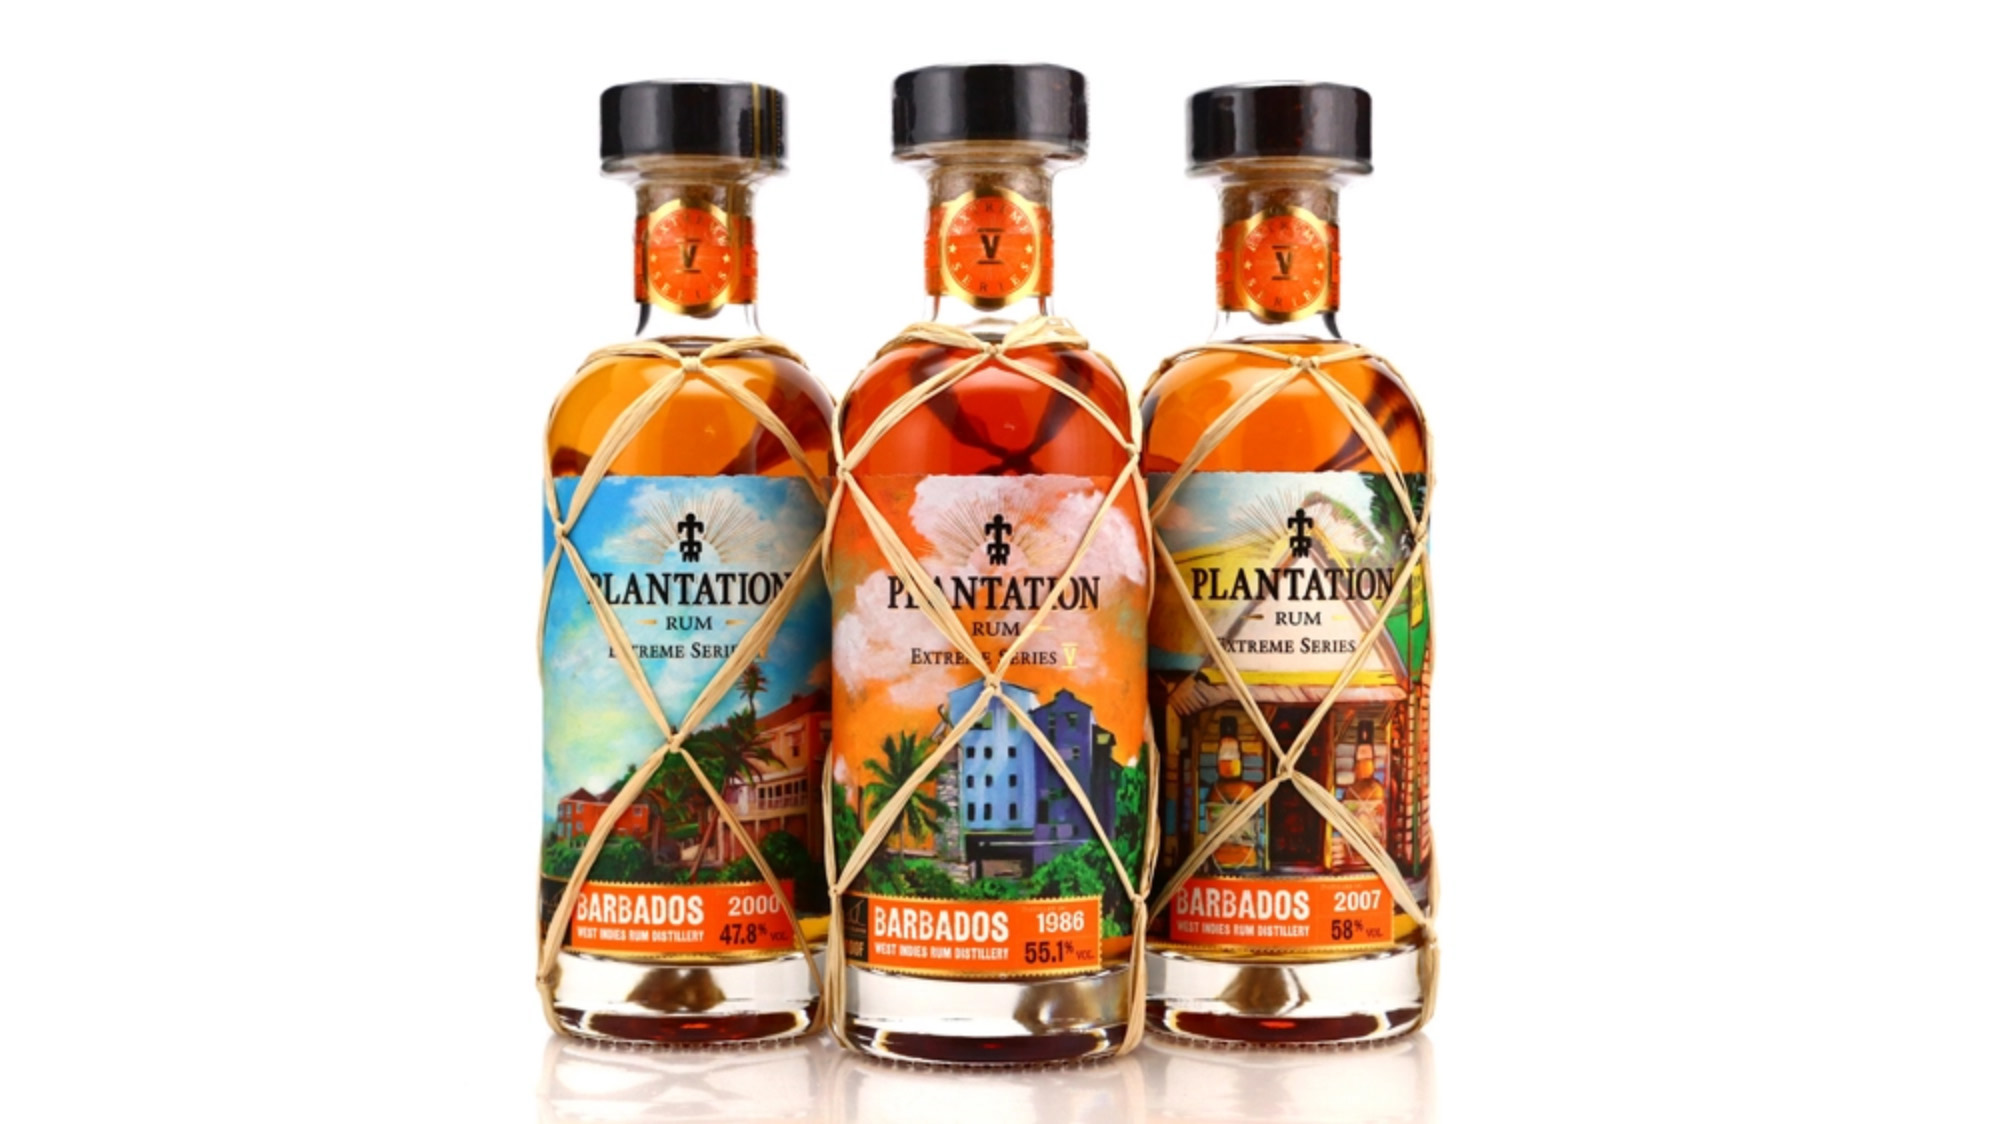 Plantation Rum Extreme Collection No. 5